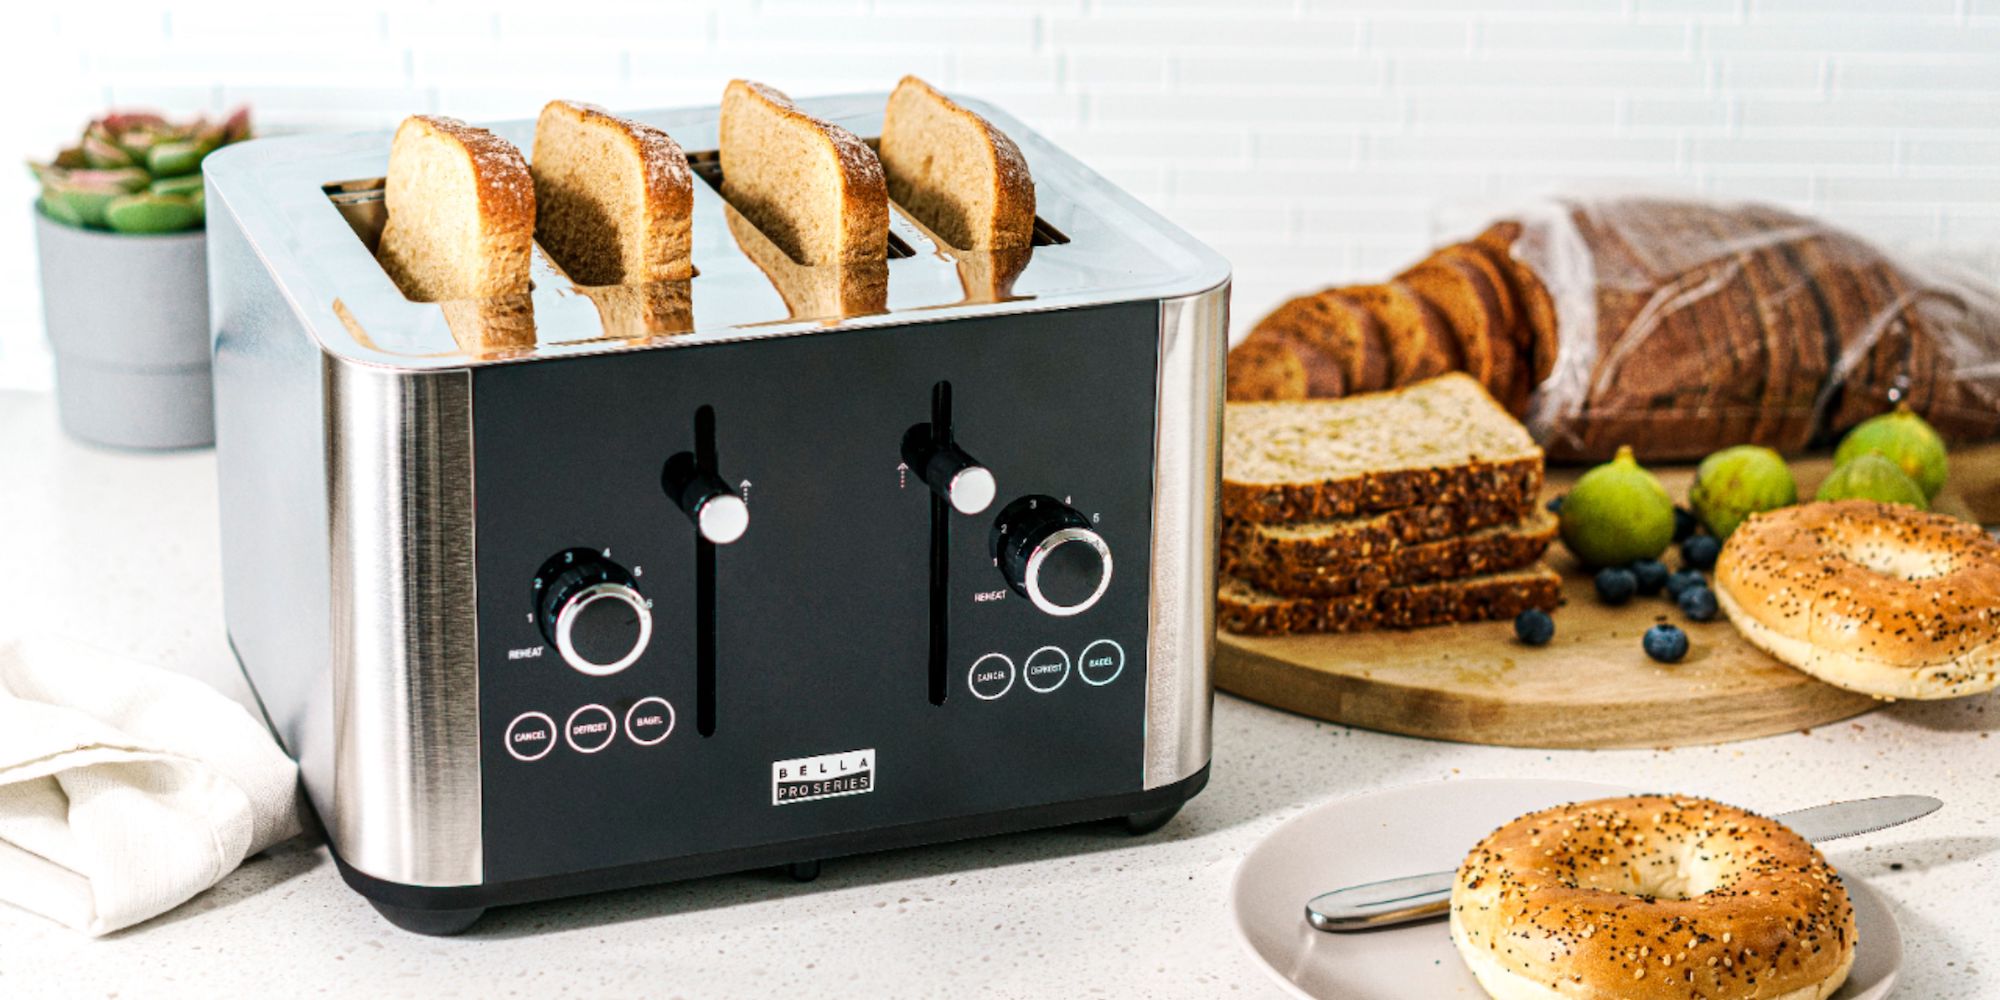 Bella's Pro 4-Slice Digital Touchscreen Toaster with LCD displays now $45  (Reg. $70)